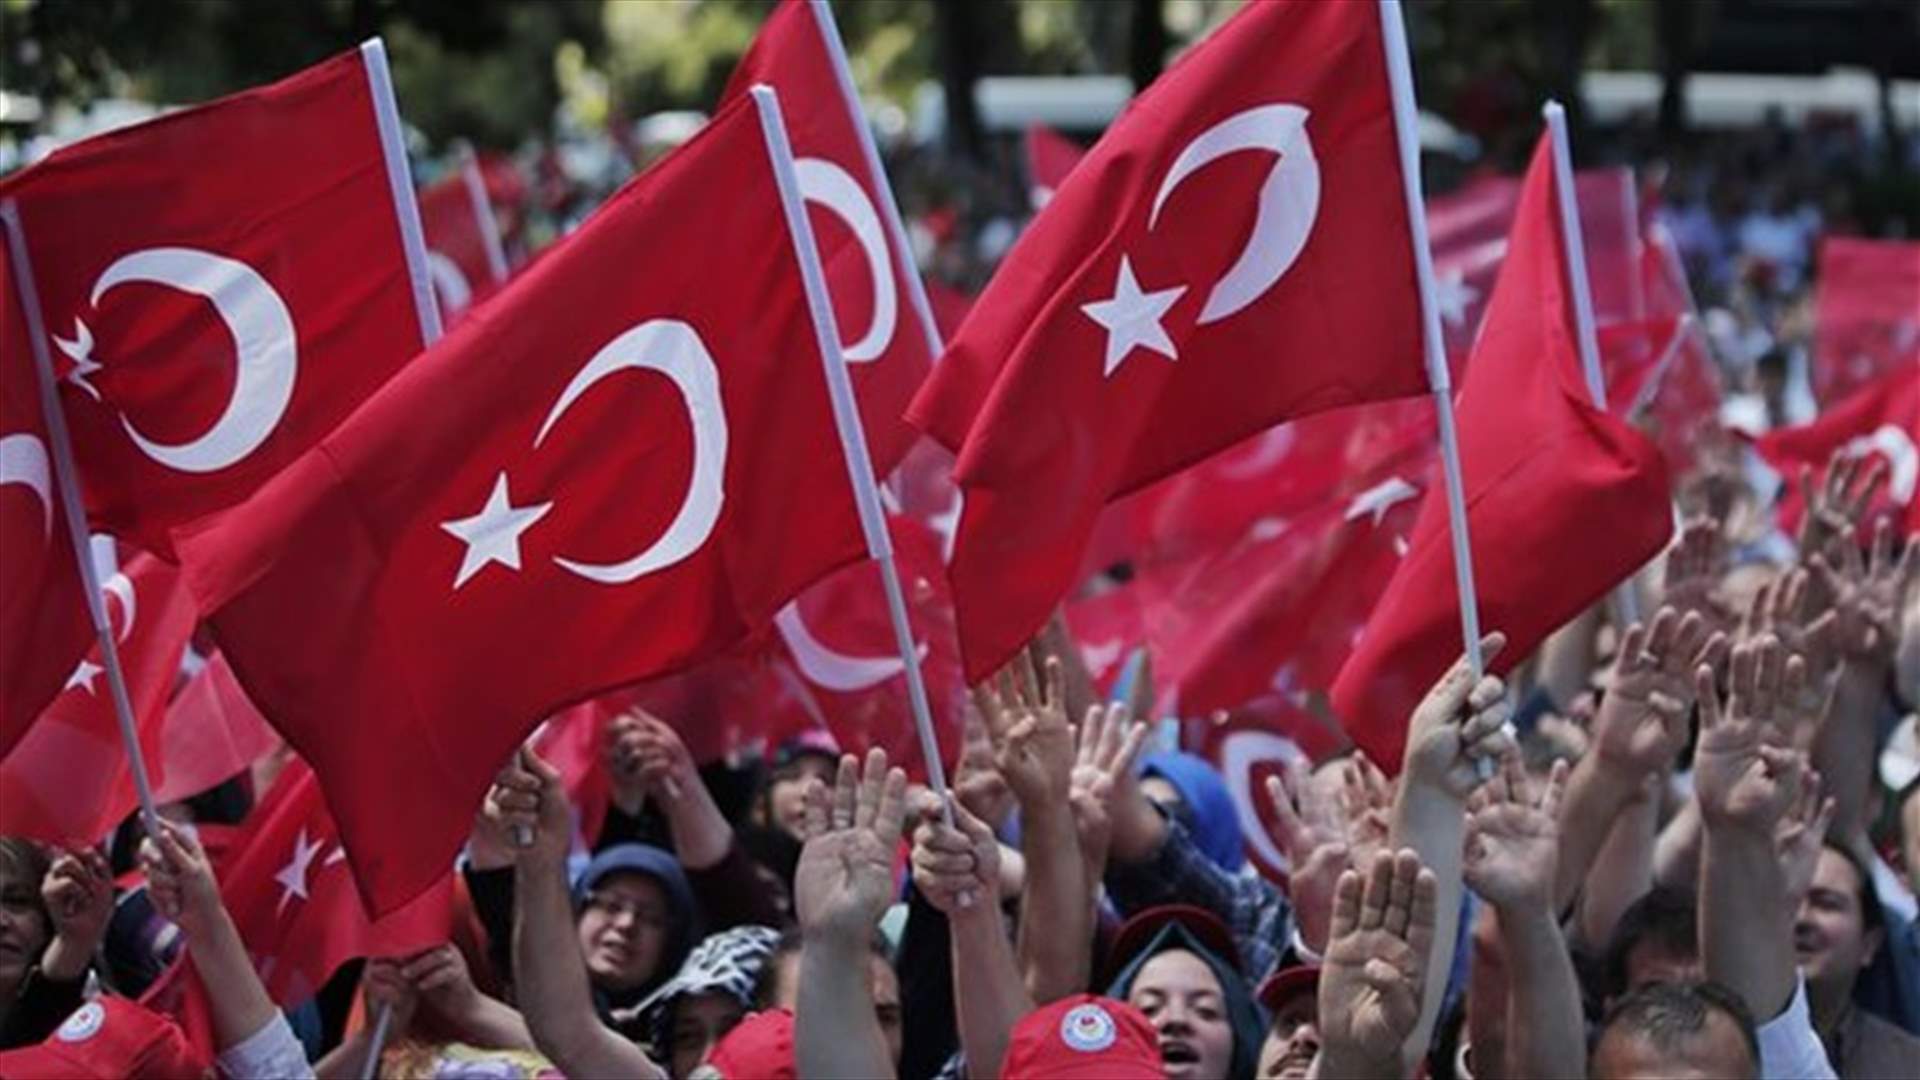 Turkey issues detention warrants for 137 more academics over failed coup -CNN Turk